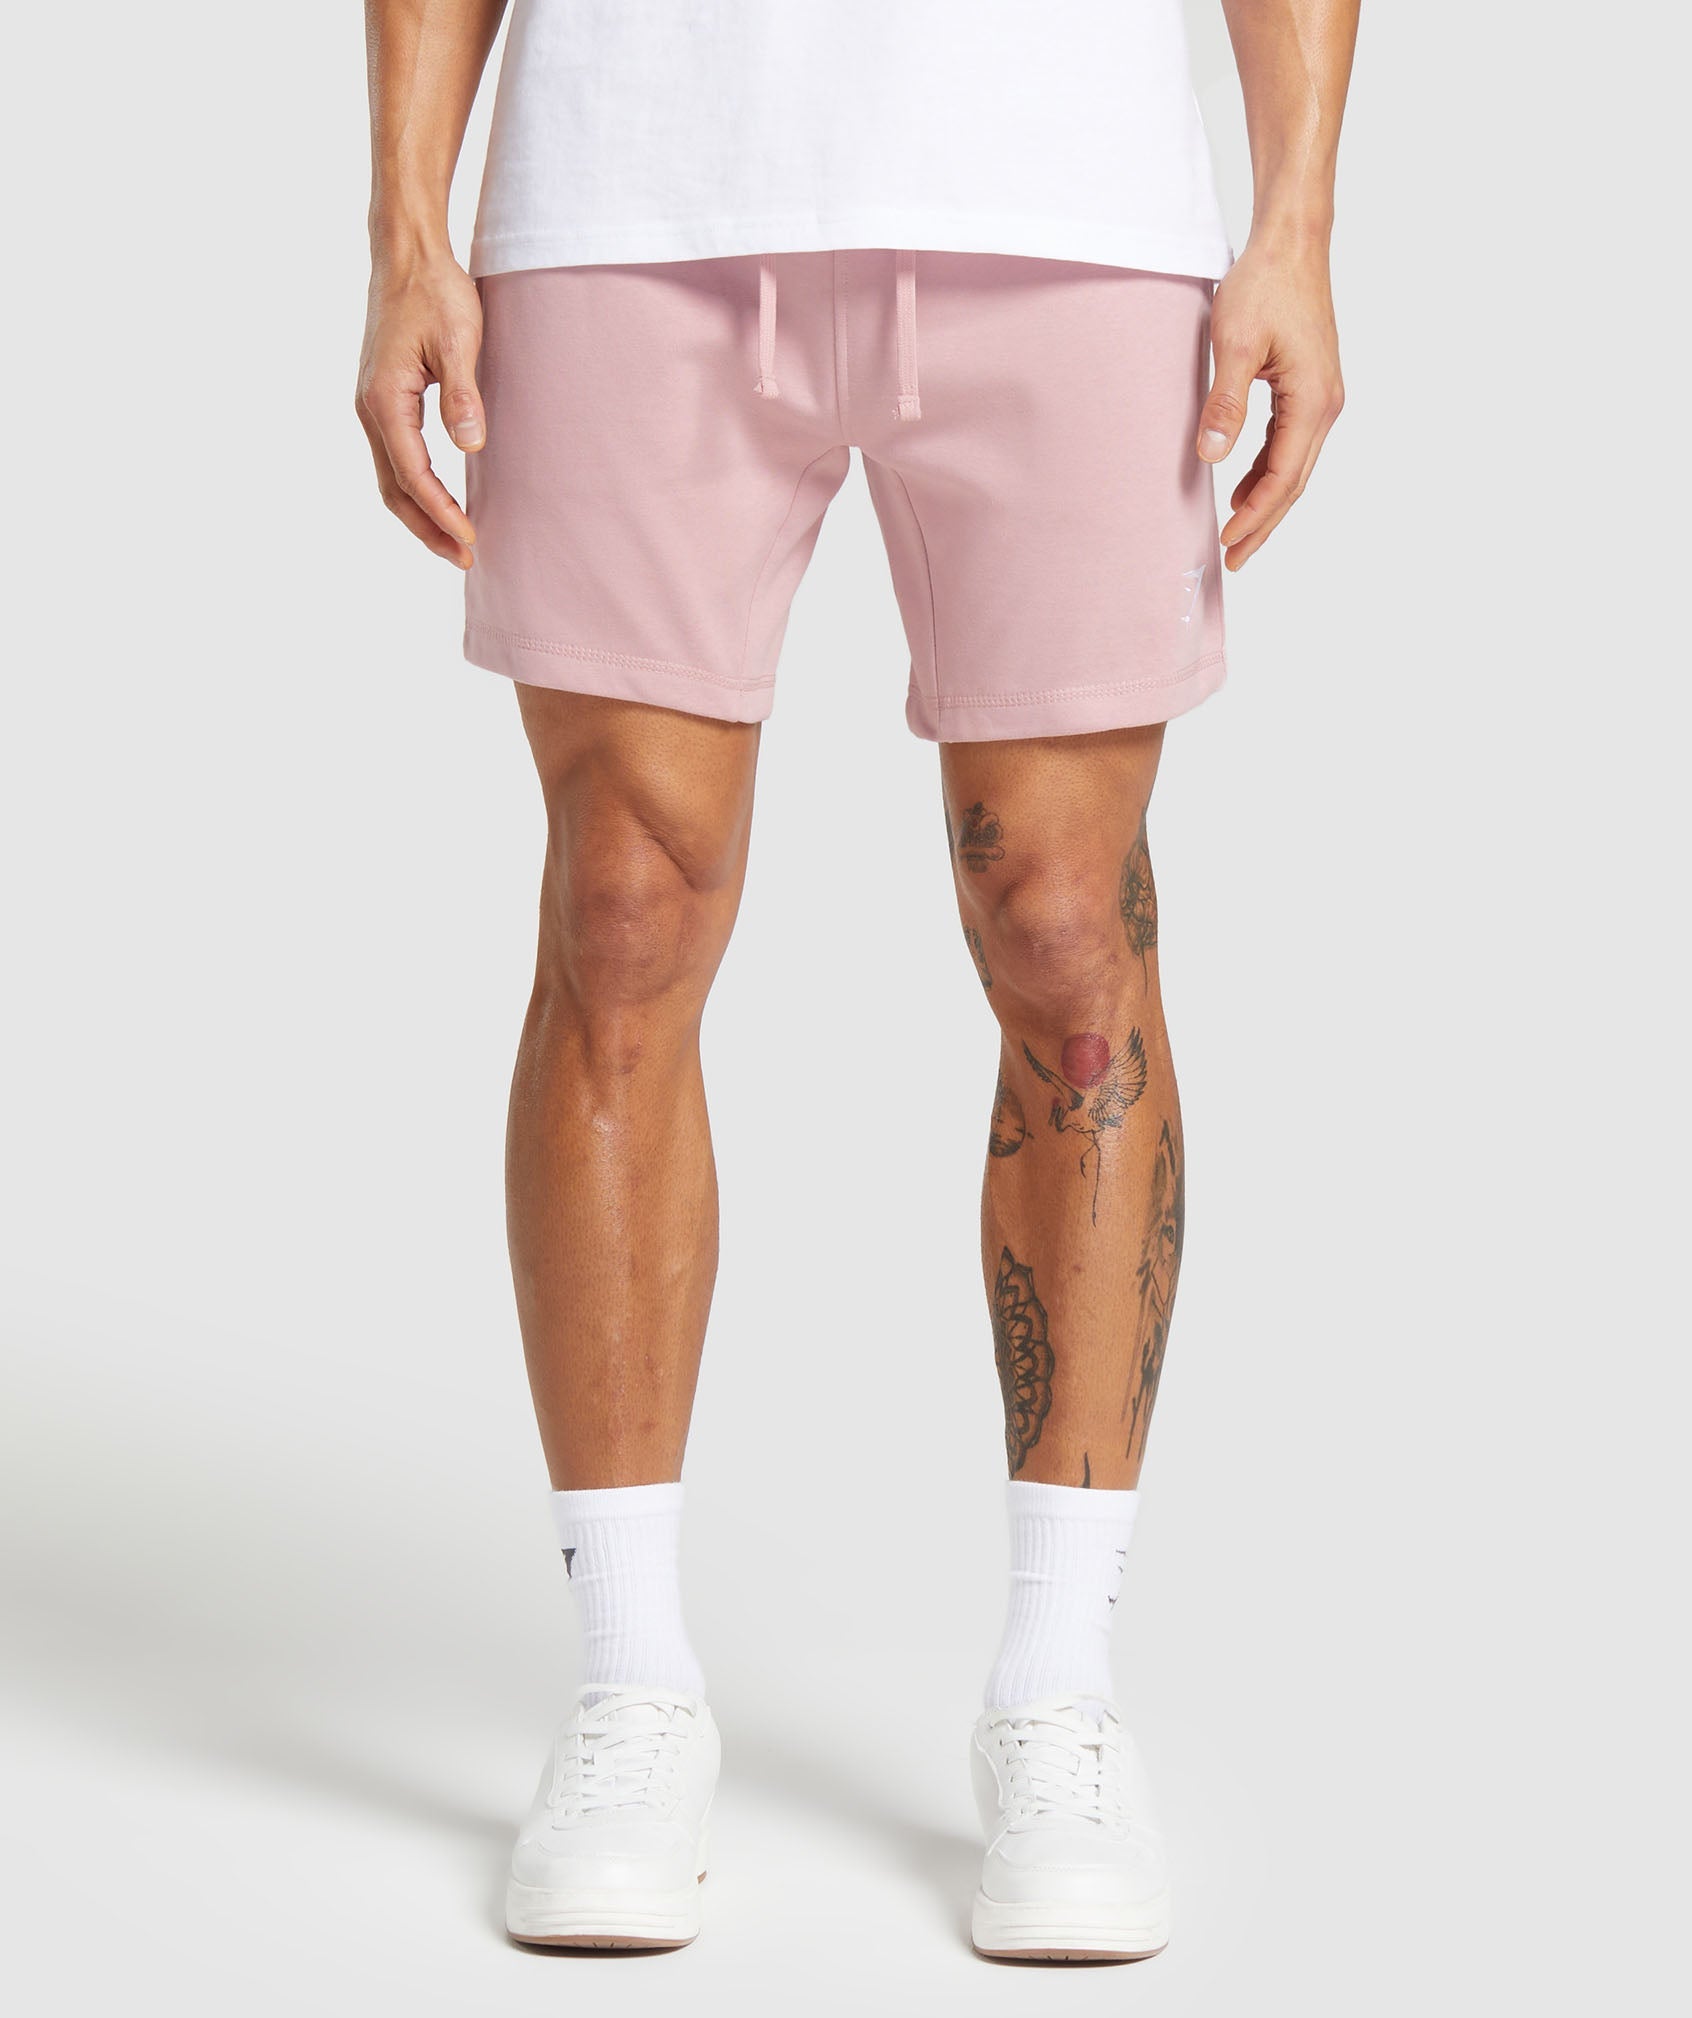 Crest 7" Shorts in Light Pink